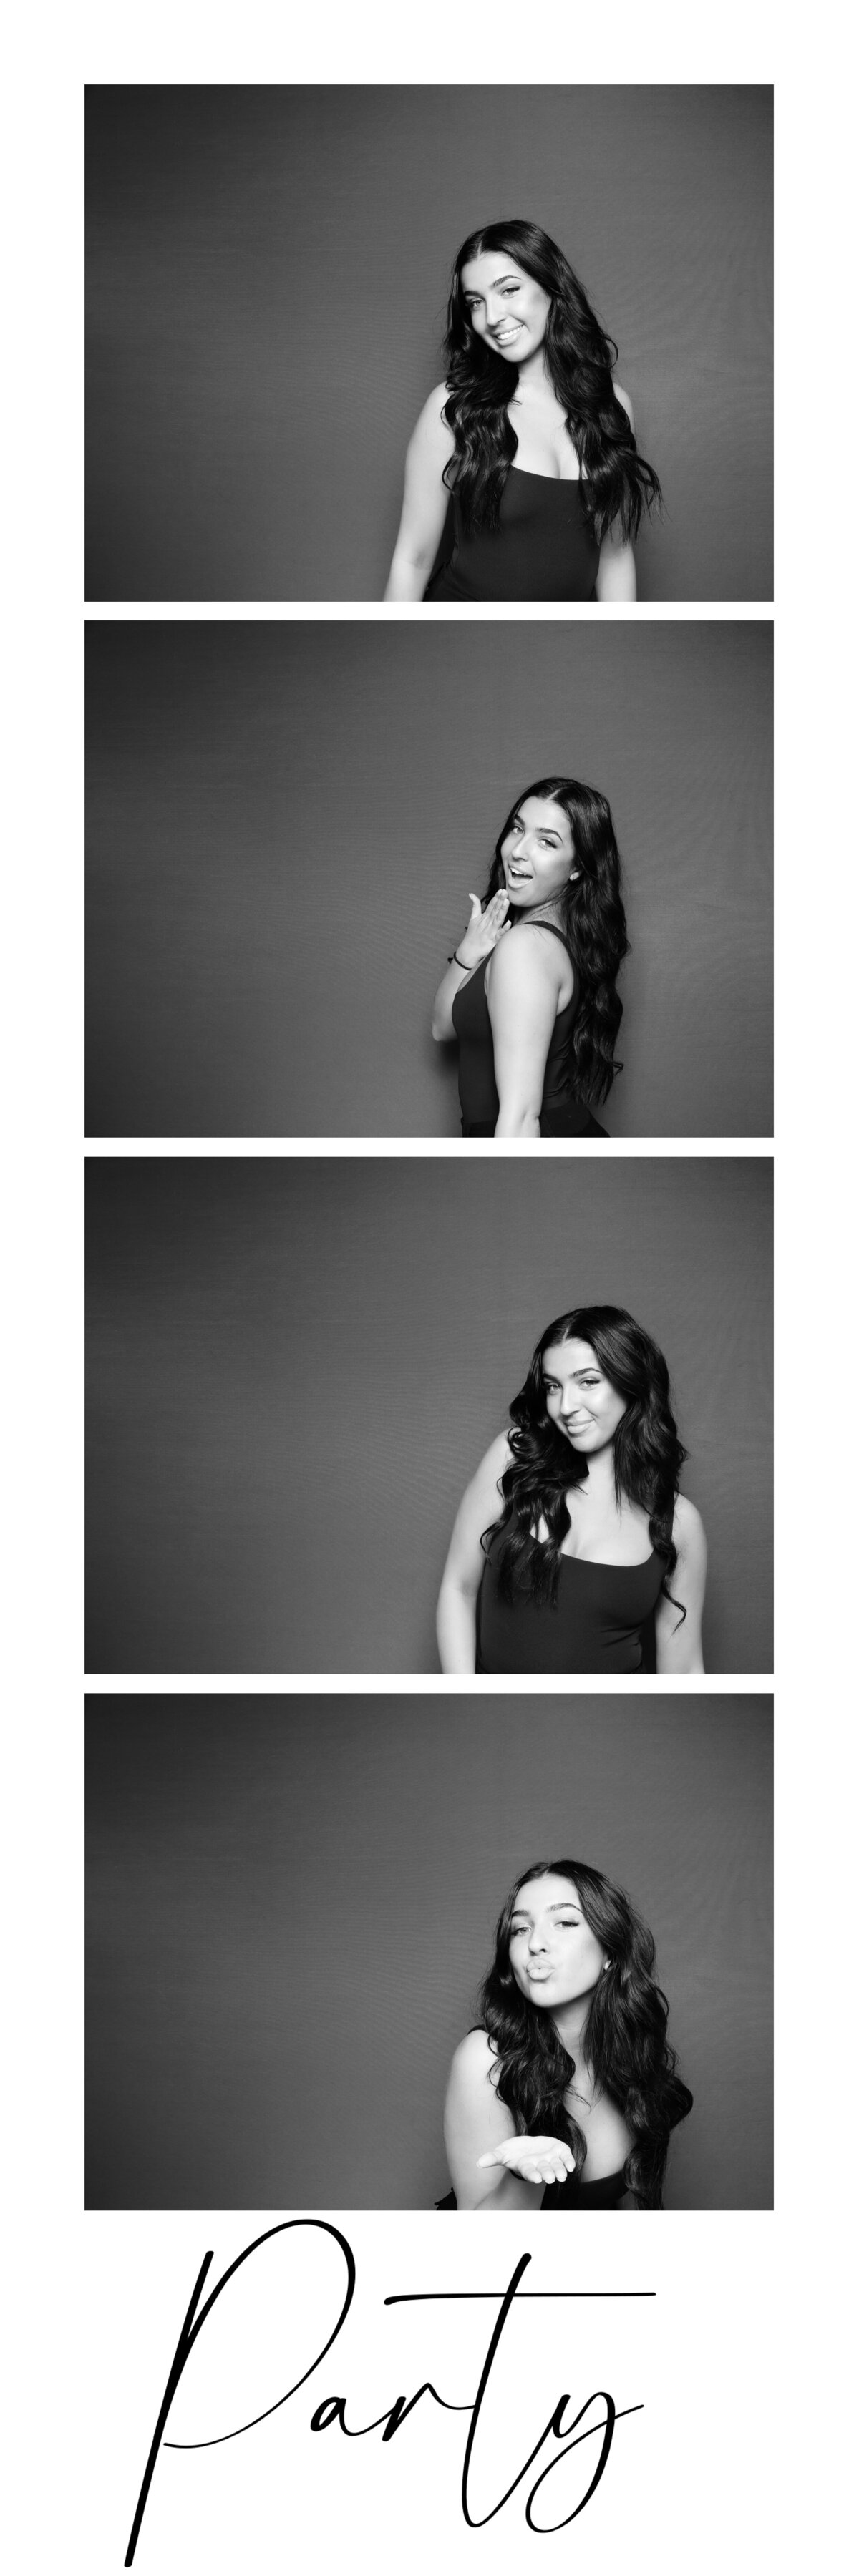 four glam pictures of a girl in a 2x6 photo strip